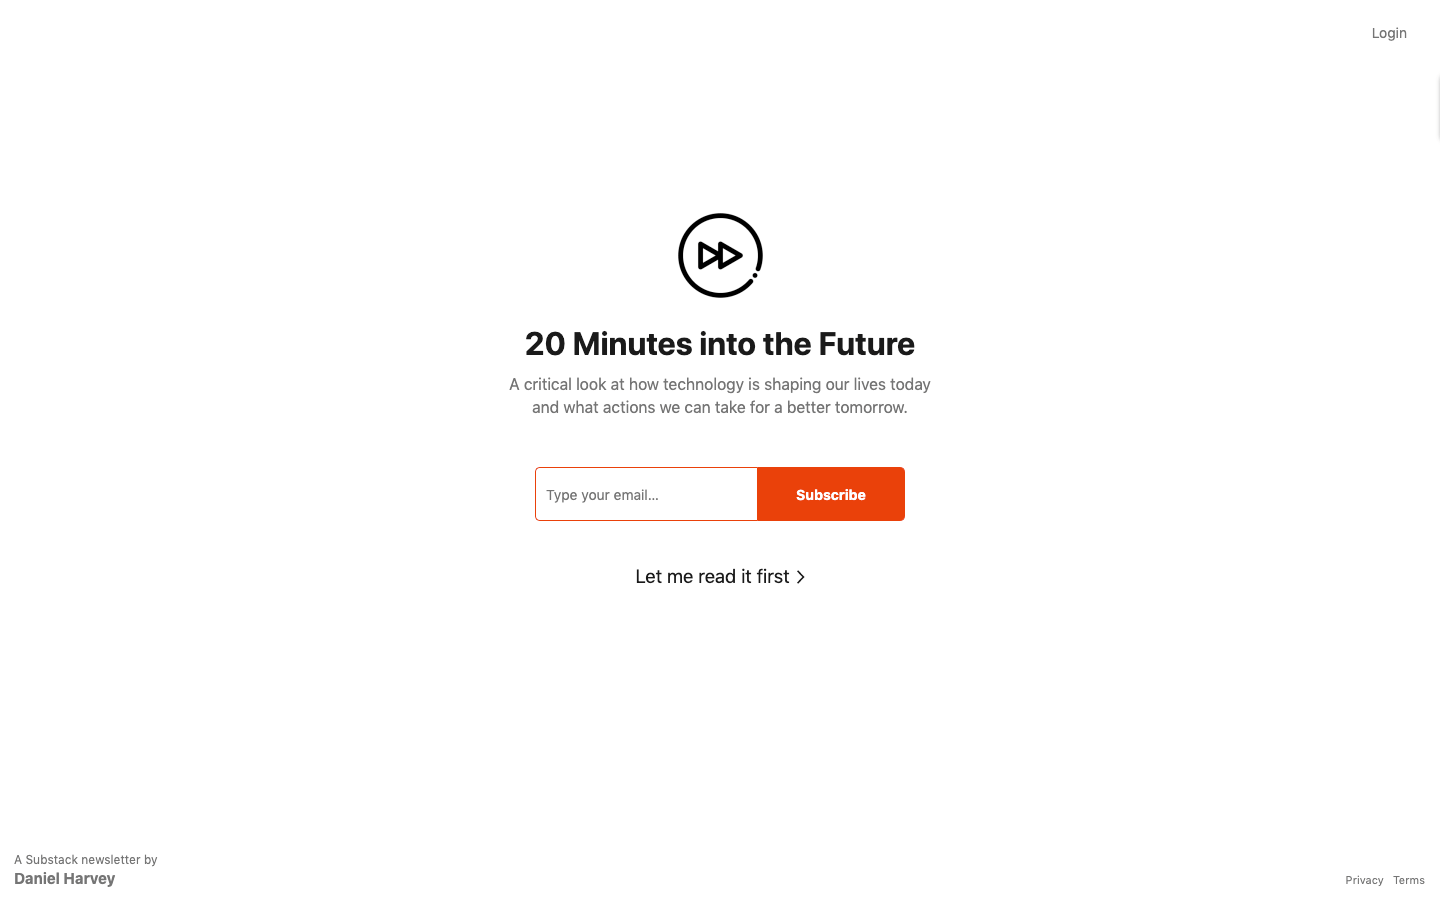 20 Minutes into the Future homepage